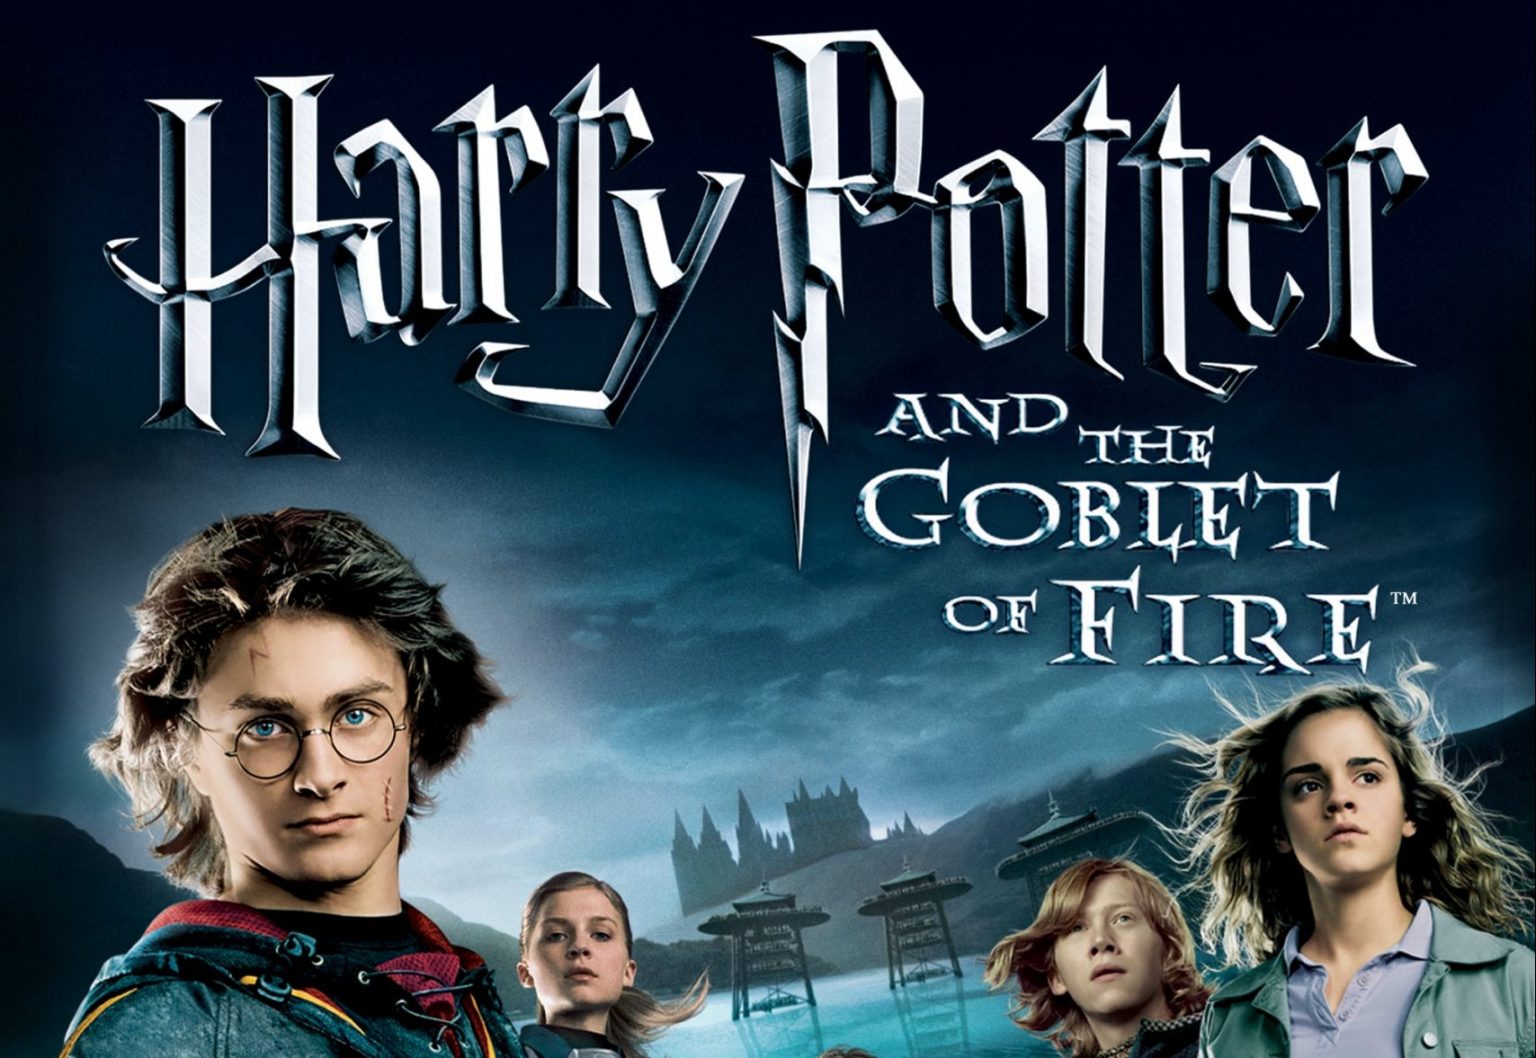 Harry Potter And The Goblet Of Fire Take 2 Cinema